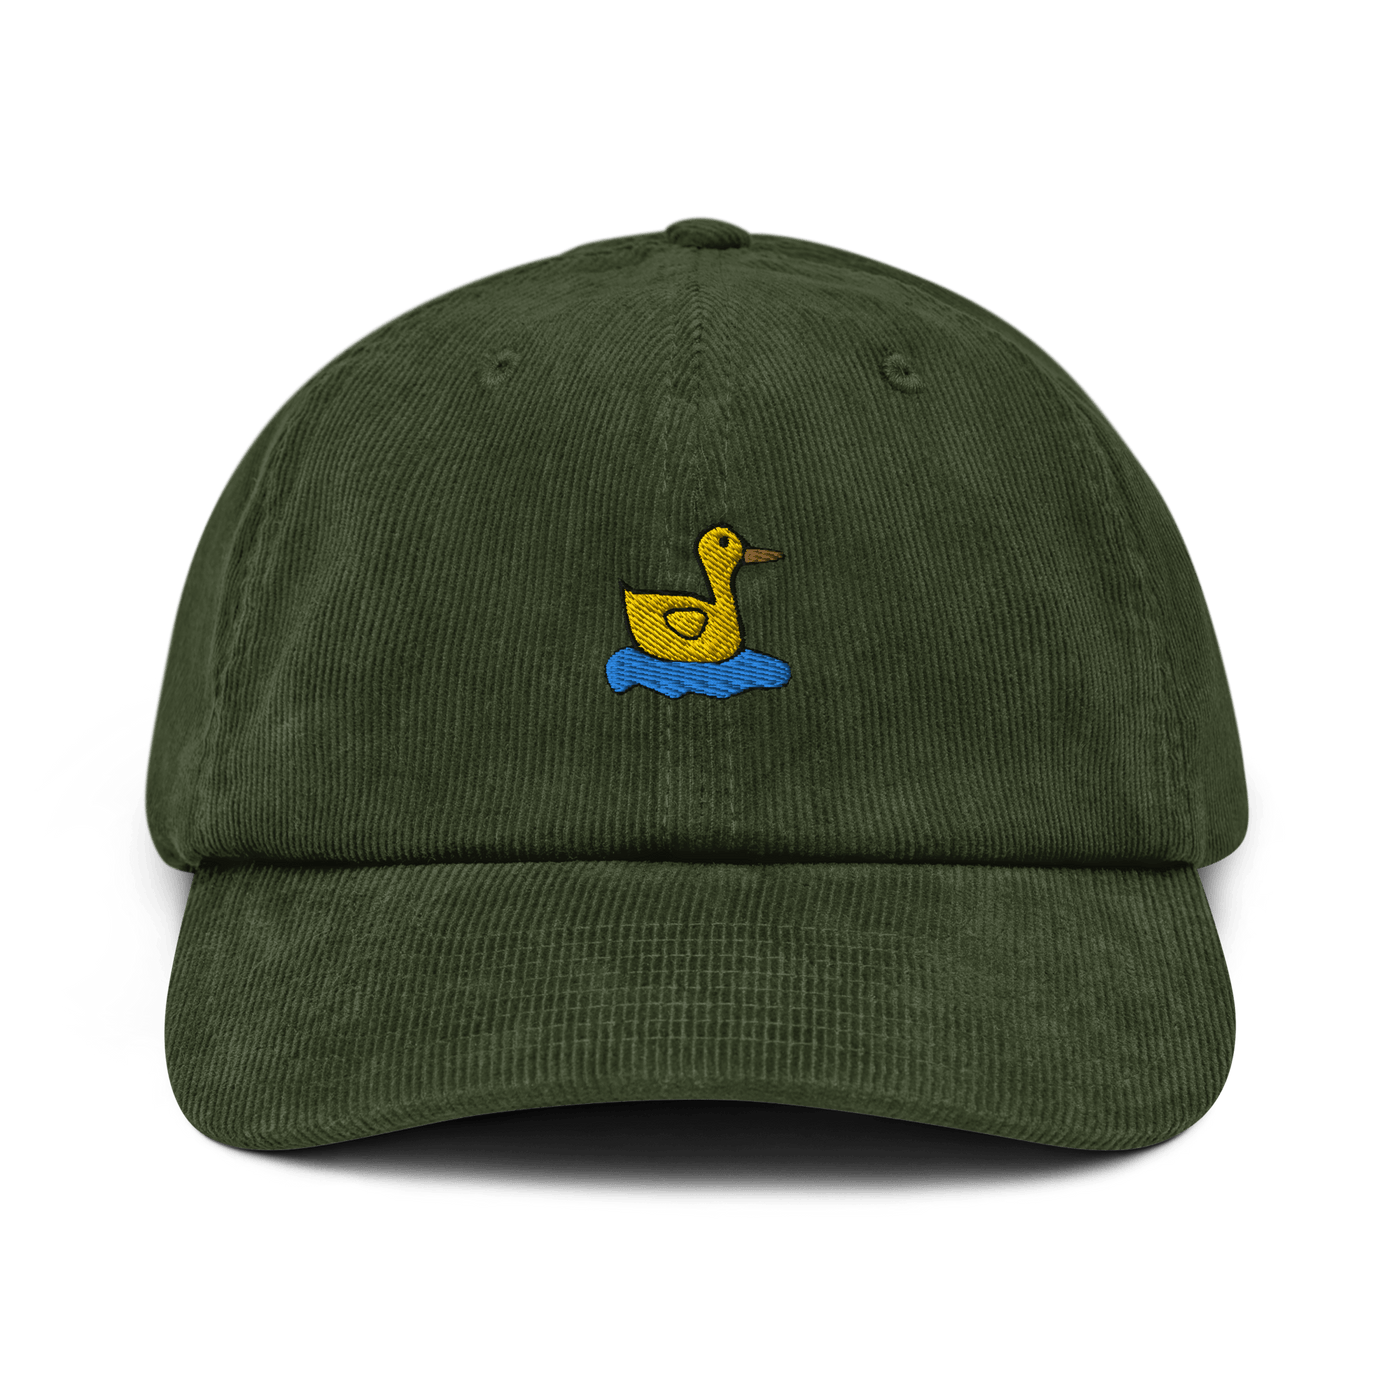 Lonely Duck Corduroy hat - Oxford Navy - - Just Another Cap Store